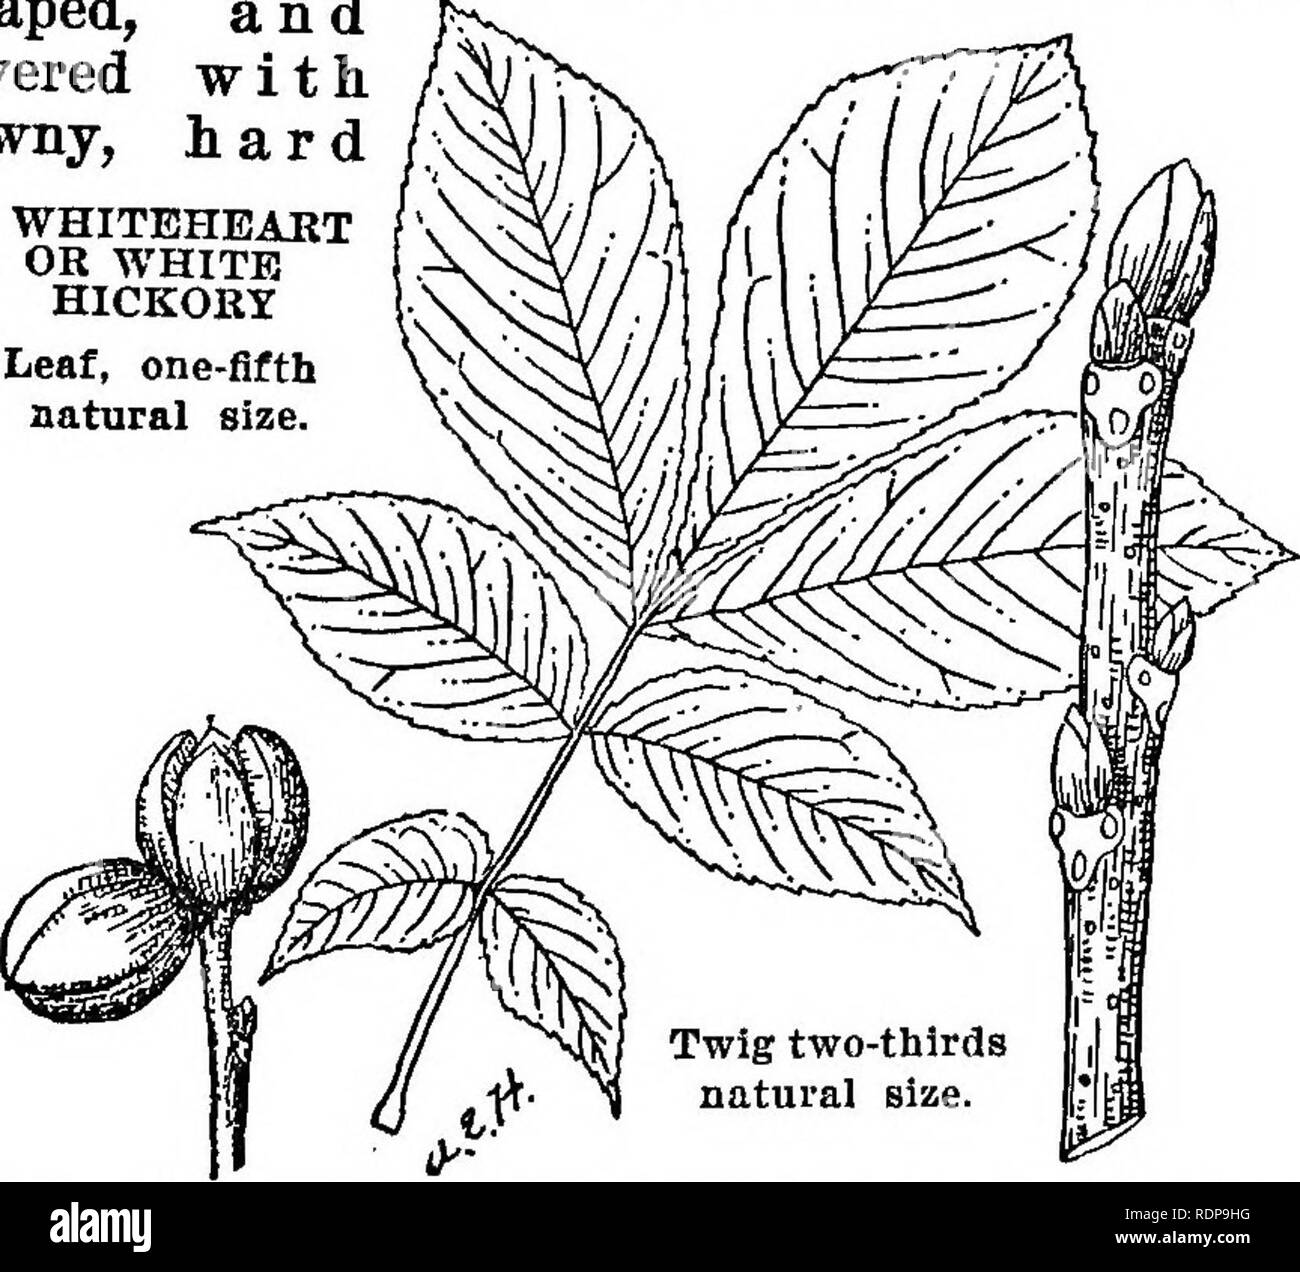 . Common forest trees of North Carolina. How to know them. A pocket manual. Trees; Forests and forestry. &gt;-«l^3-^ -^ ! -€&gt; -e&gt; ':&amp;. WHITEHEART OR WHITE HICKORY (Mockernut Hickory) {Hicoria alia Britton) {Garya alia K. Koch) THE white hickory, whiteheart, mockernut, or big-bud hickory is commoii on well-drained soils throughout the State. It is a tall, short-limbed tree averaging 60 feet high and 1 to 2 feet in diameter. The bark is dark gray, hard, closely and deeply furrowed, often apparently cross-furrowed or netted. The winter buds are large, round or broadly egg- shaped, and c Stock Photo